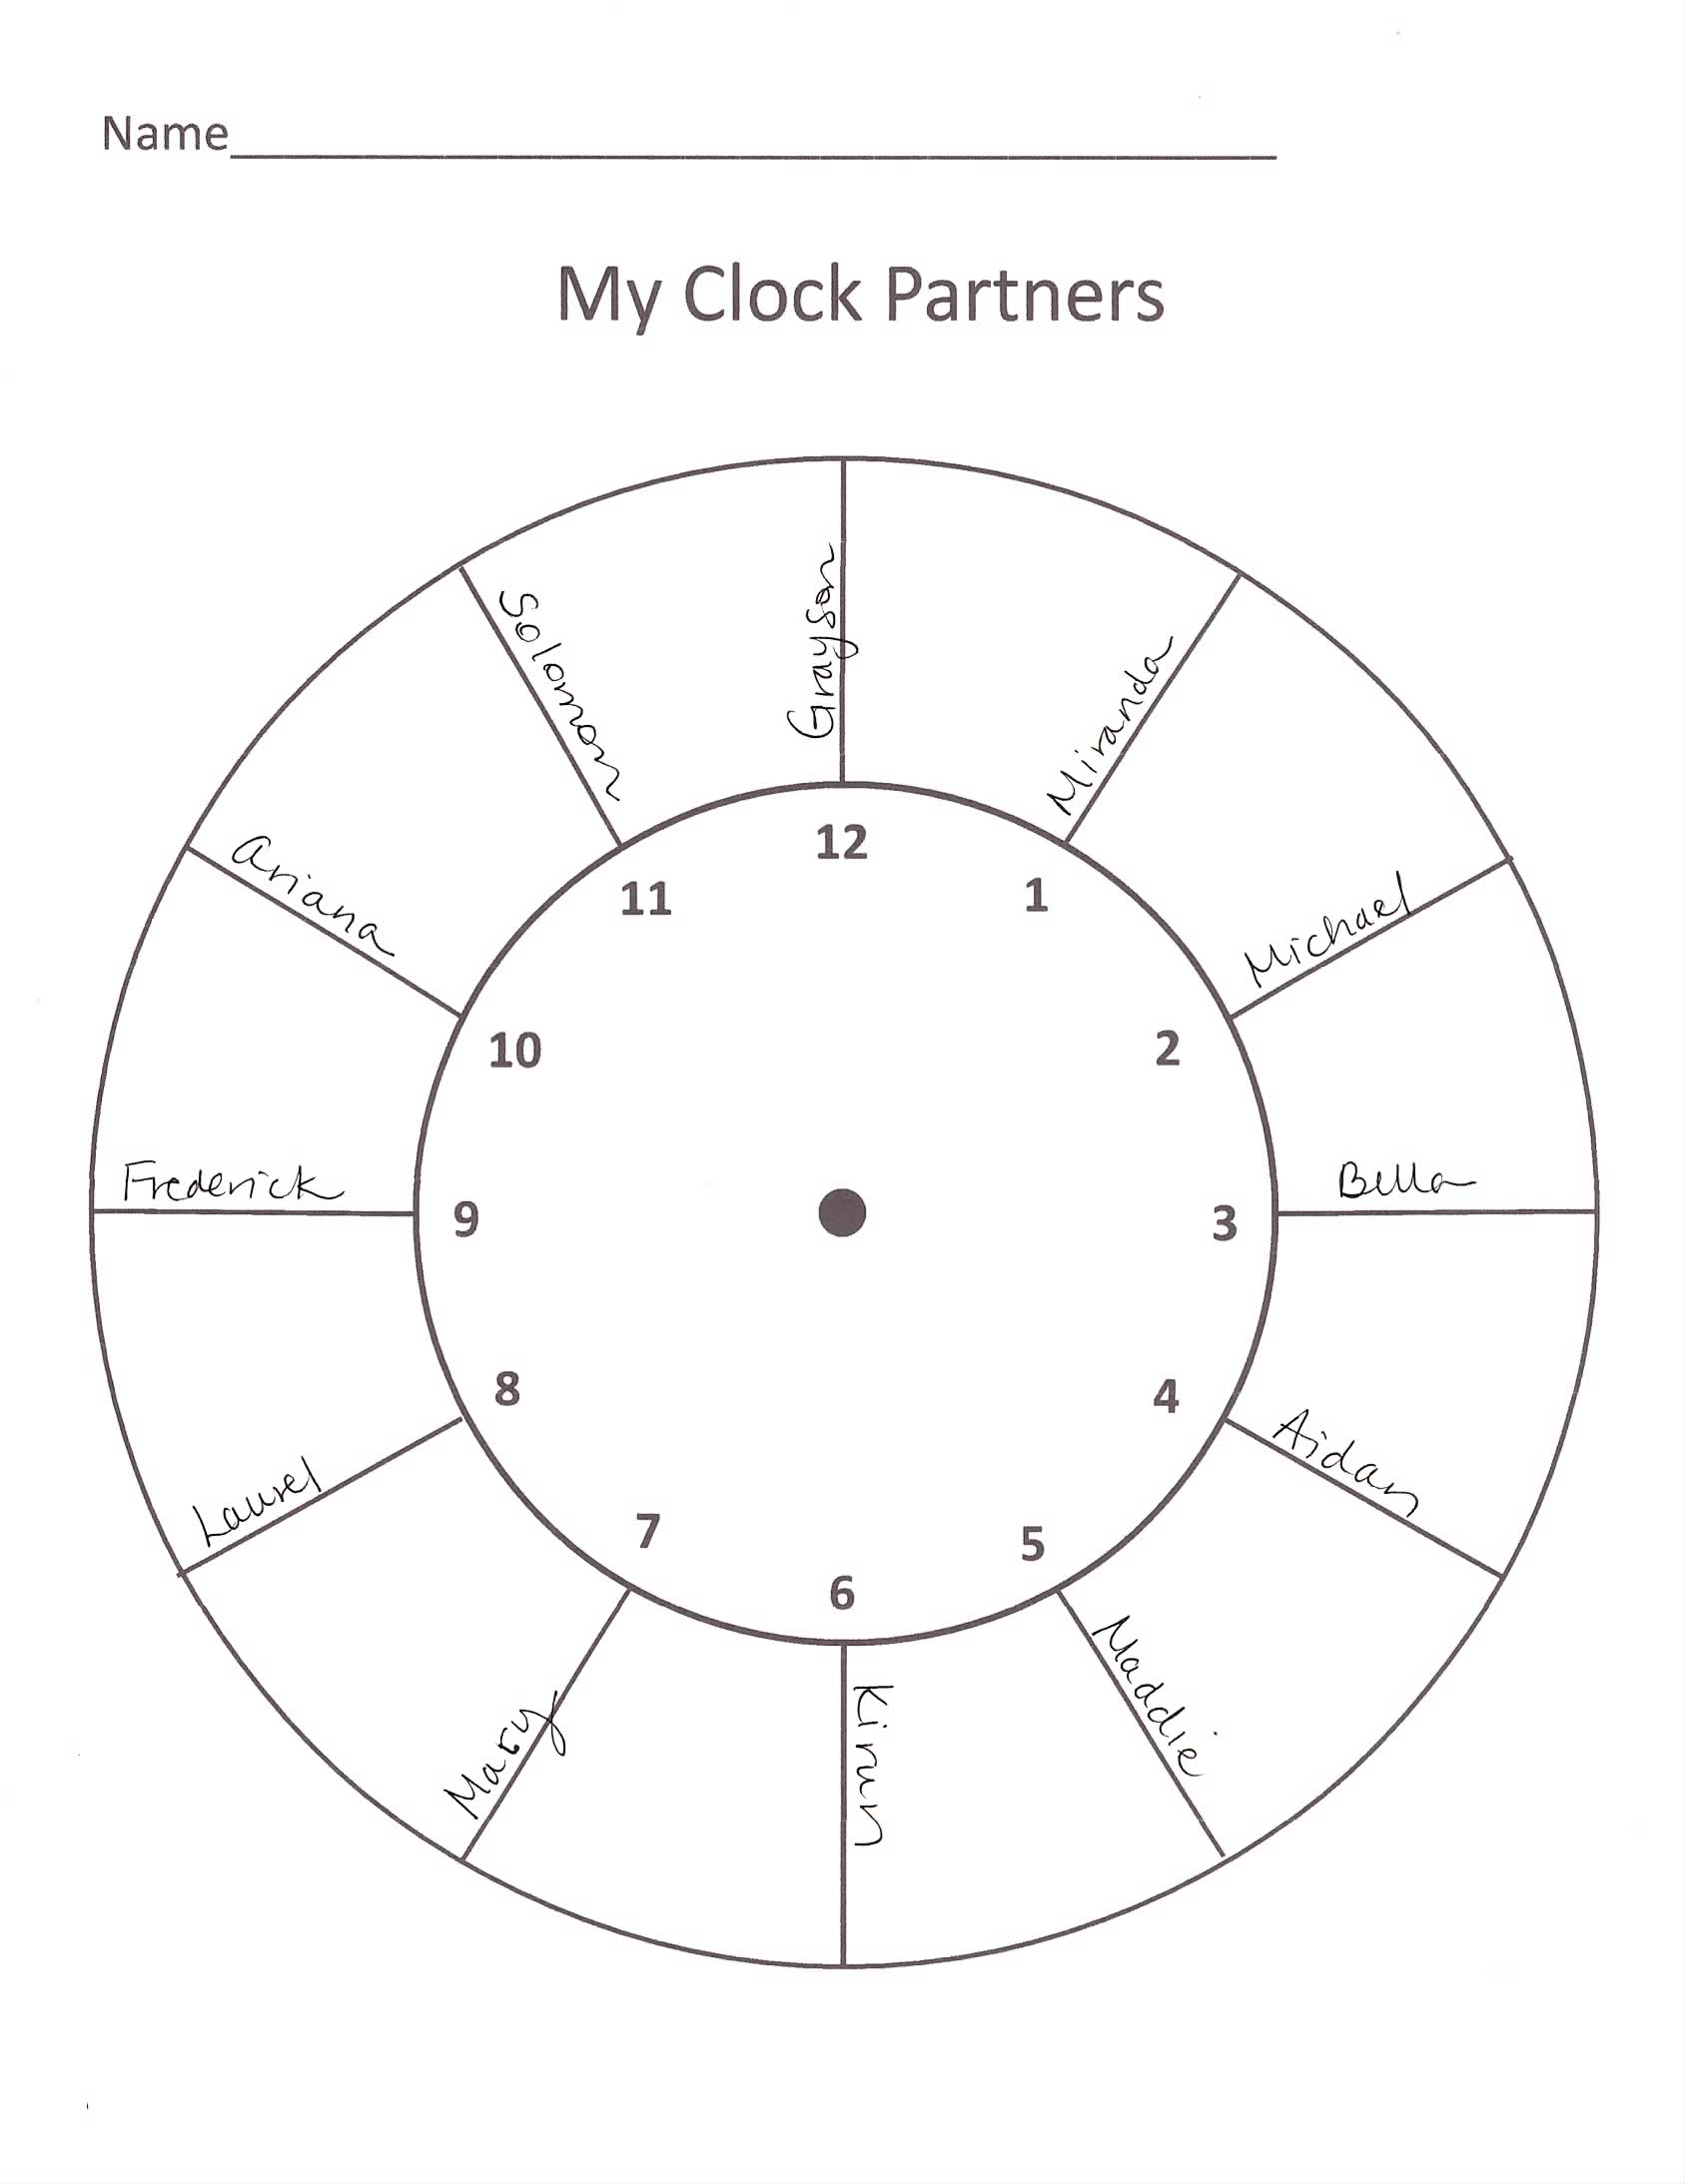 A completed clock partners sheet